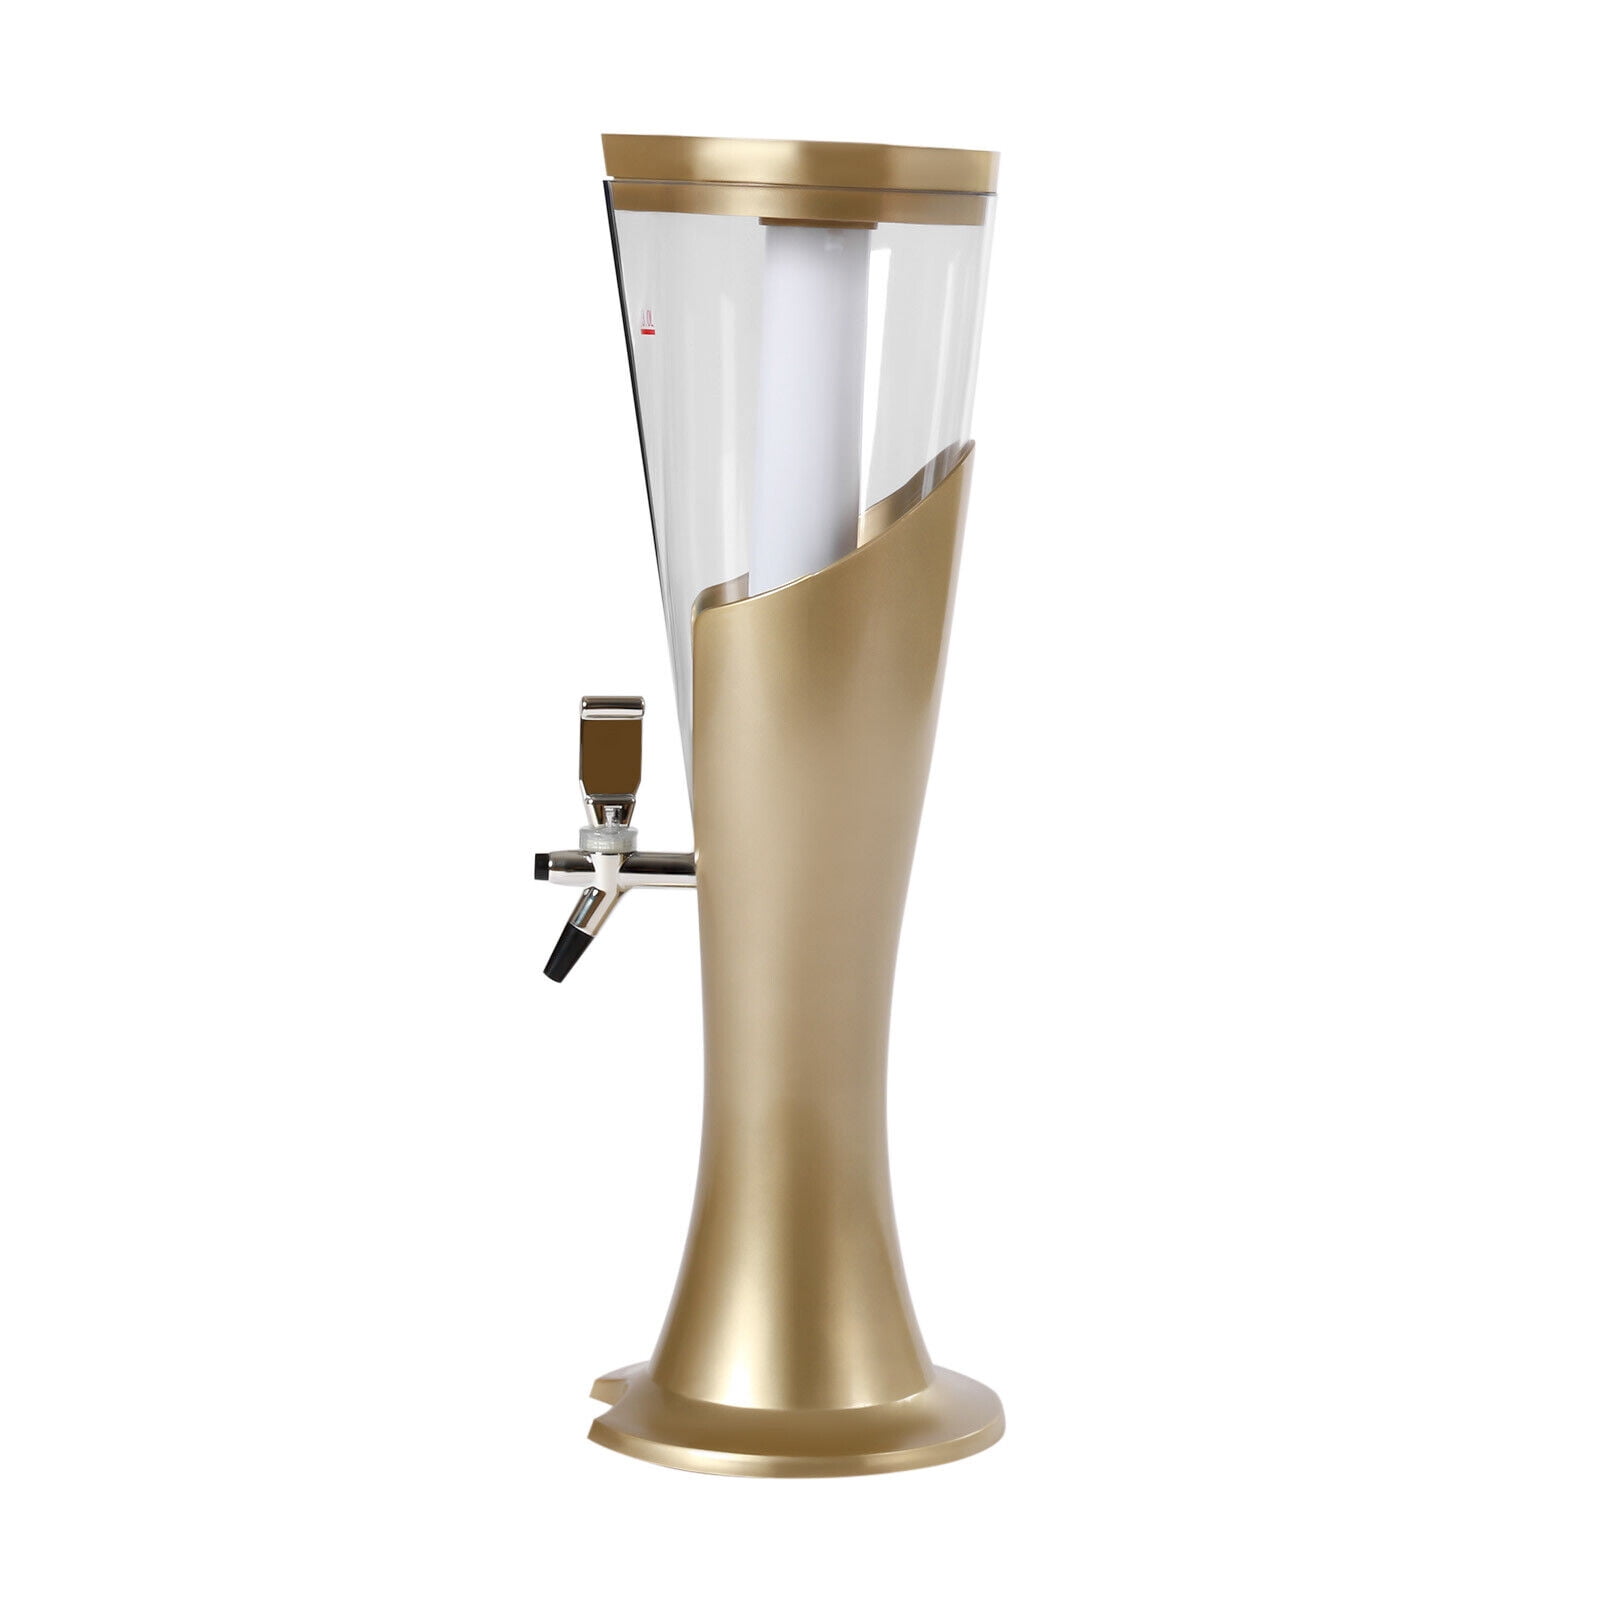 Mimosa Tower, 3L/100oz Mimosa Tower Dispenser with Ice Tube and LED Light, Tabletop Beer Dispenser (Model 2)